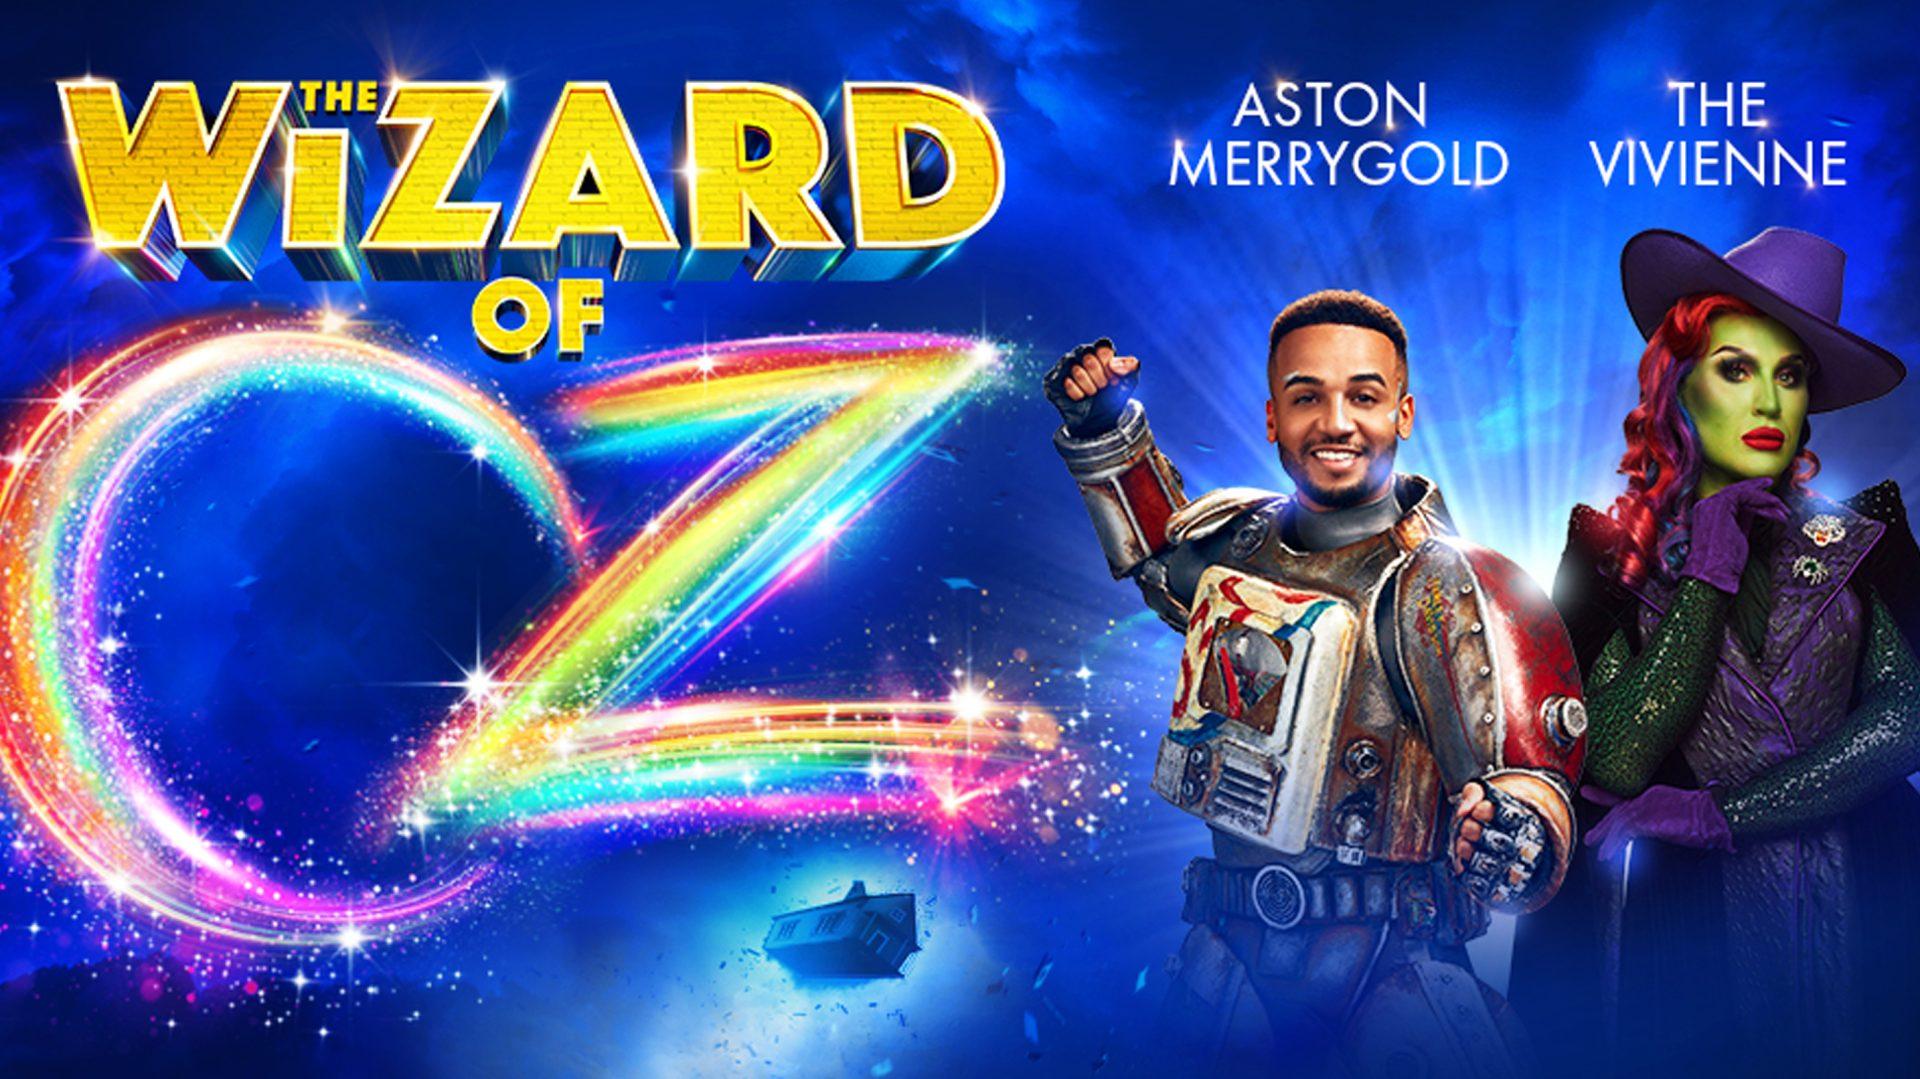 The Wonderful Wizard Of Oz returns to the west end this summer